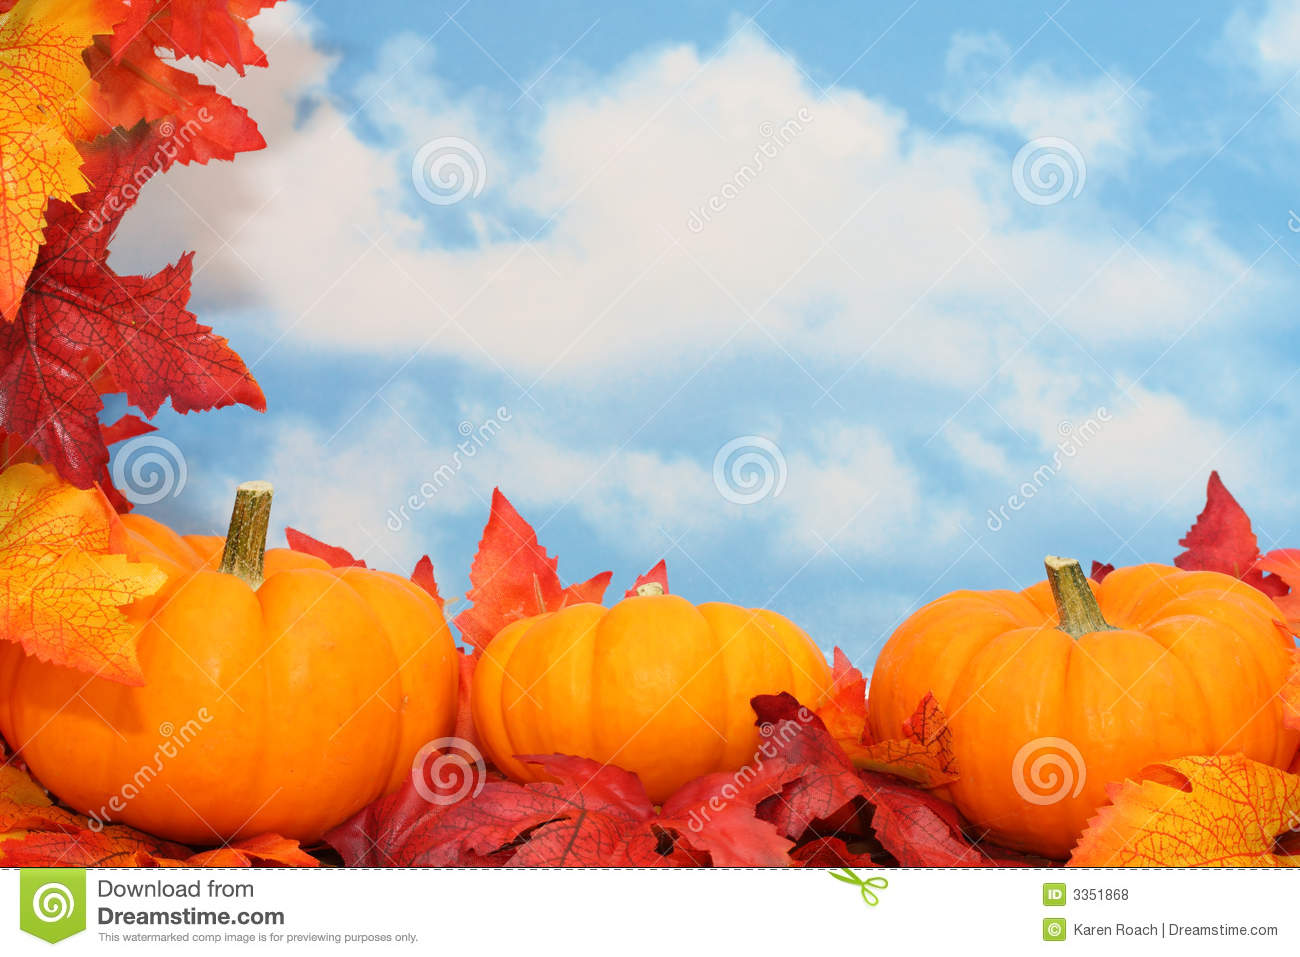     Related  Fall Scenes Pictures  Fall Harvest Scenes  Fall Clipart